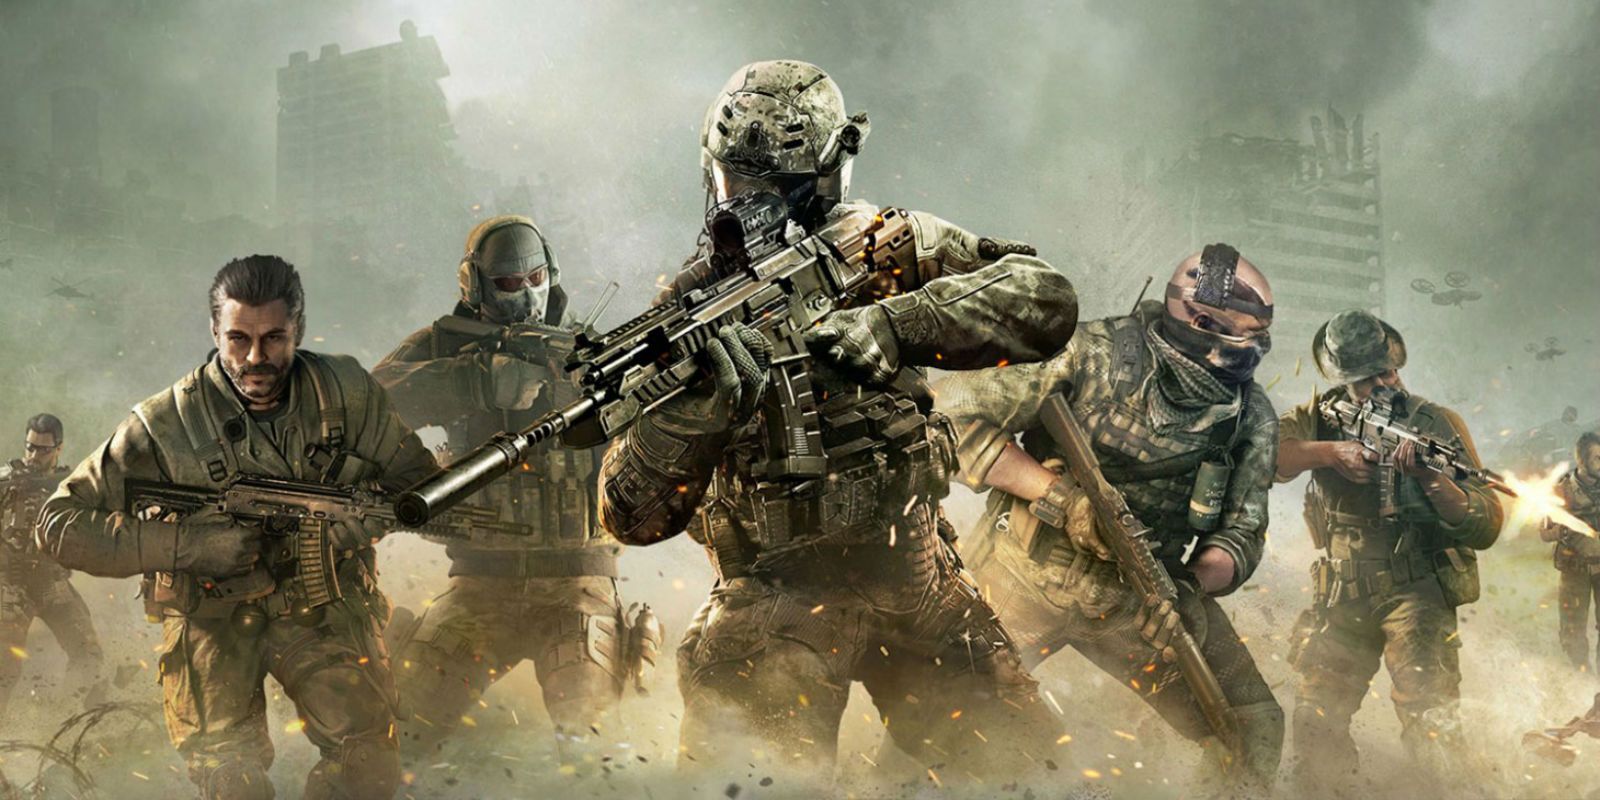 Play Call of Duty Mobile Online for Free on PC & Mobile